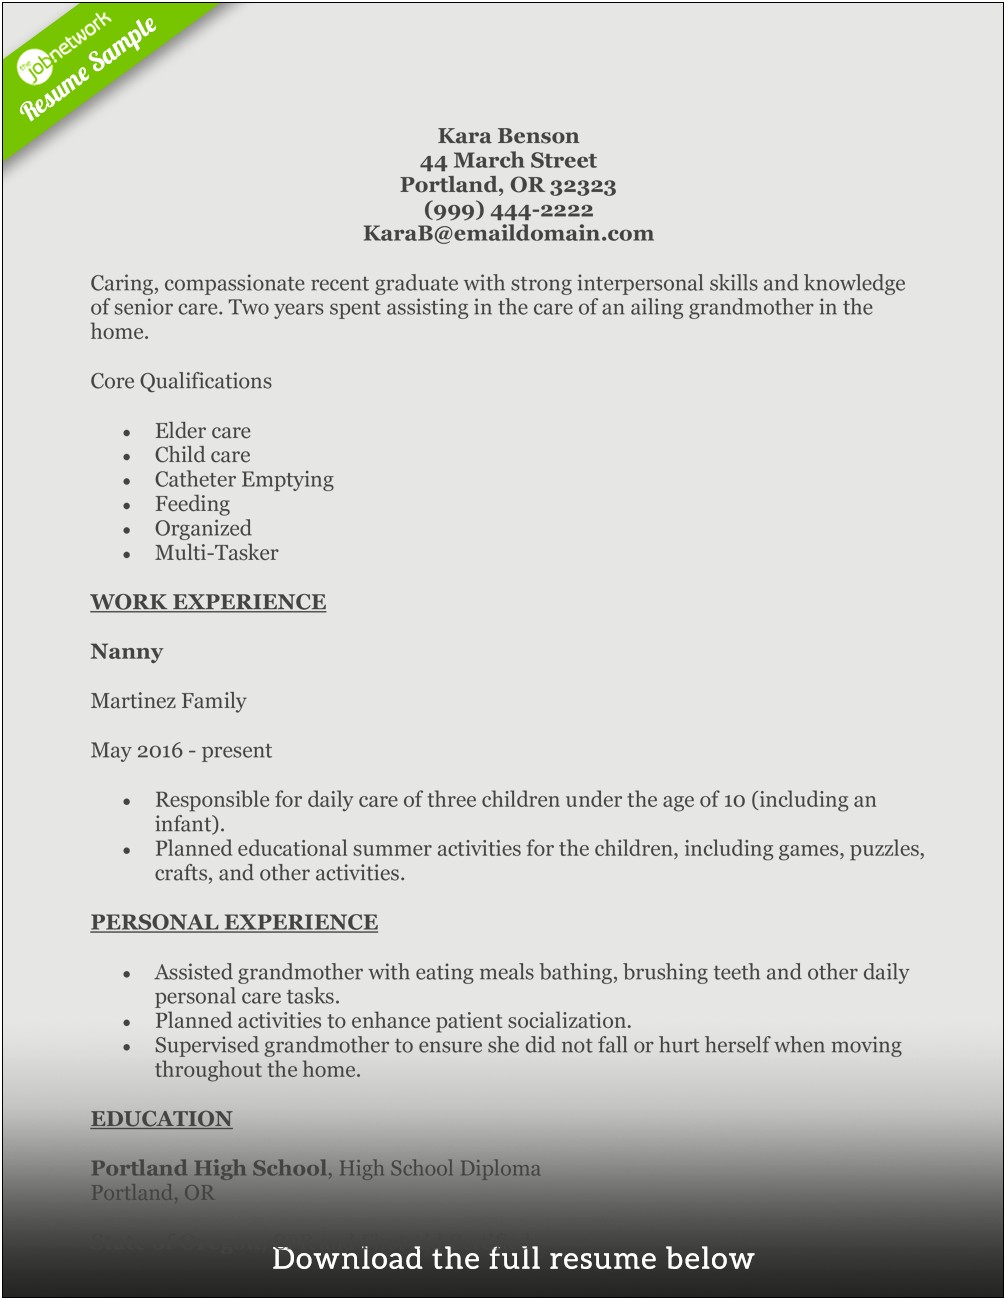 Home Health Care Aide Resume Objective